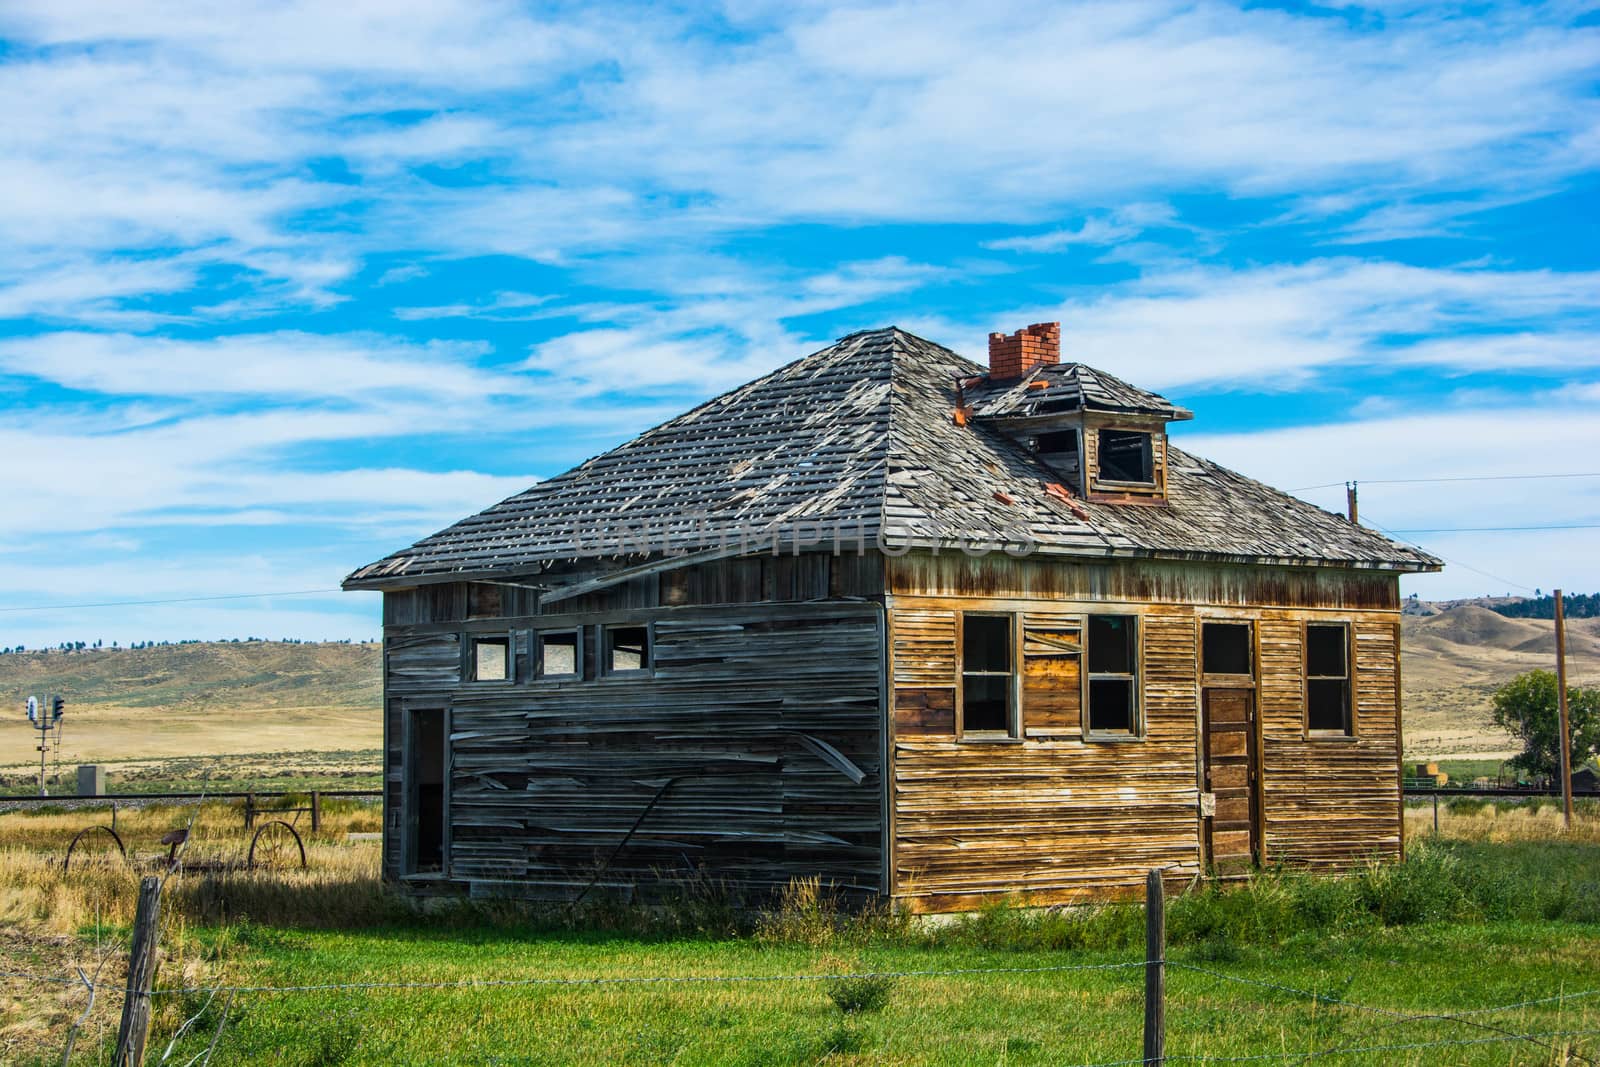 Taken at the abandoned town of Bodie, California.